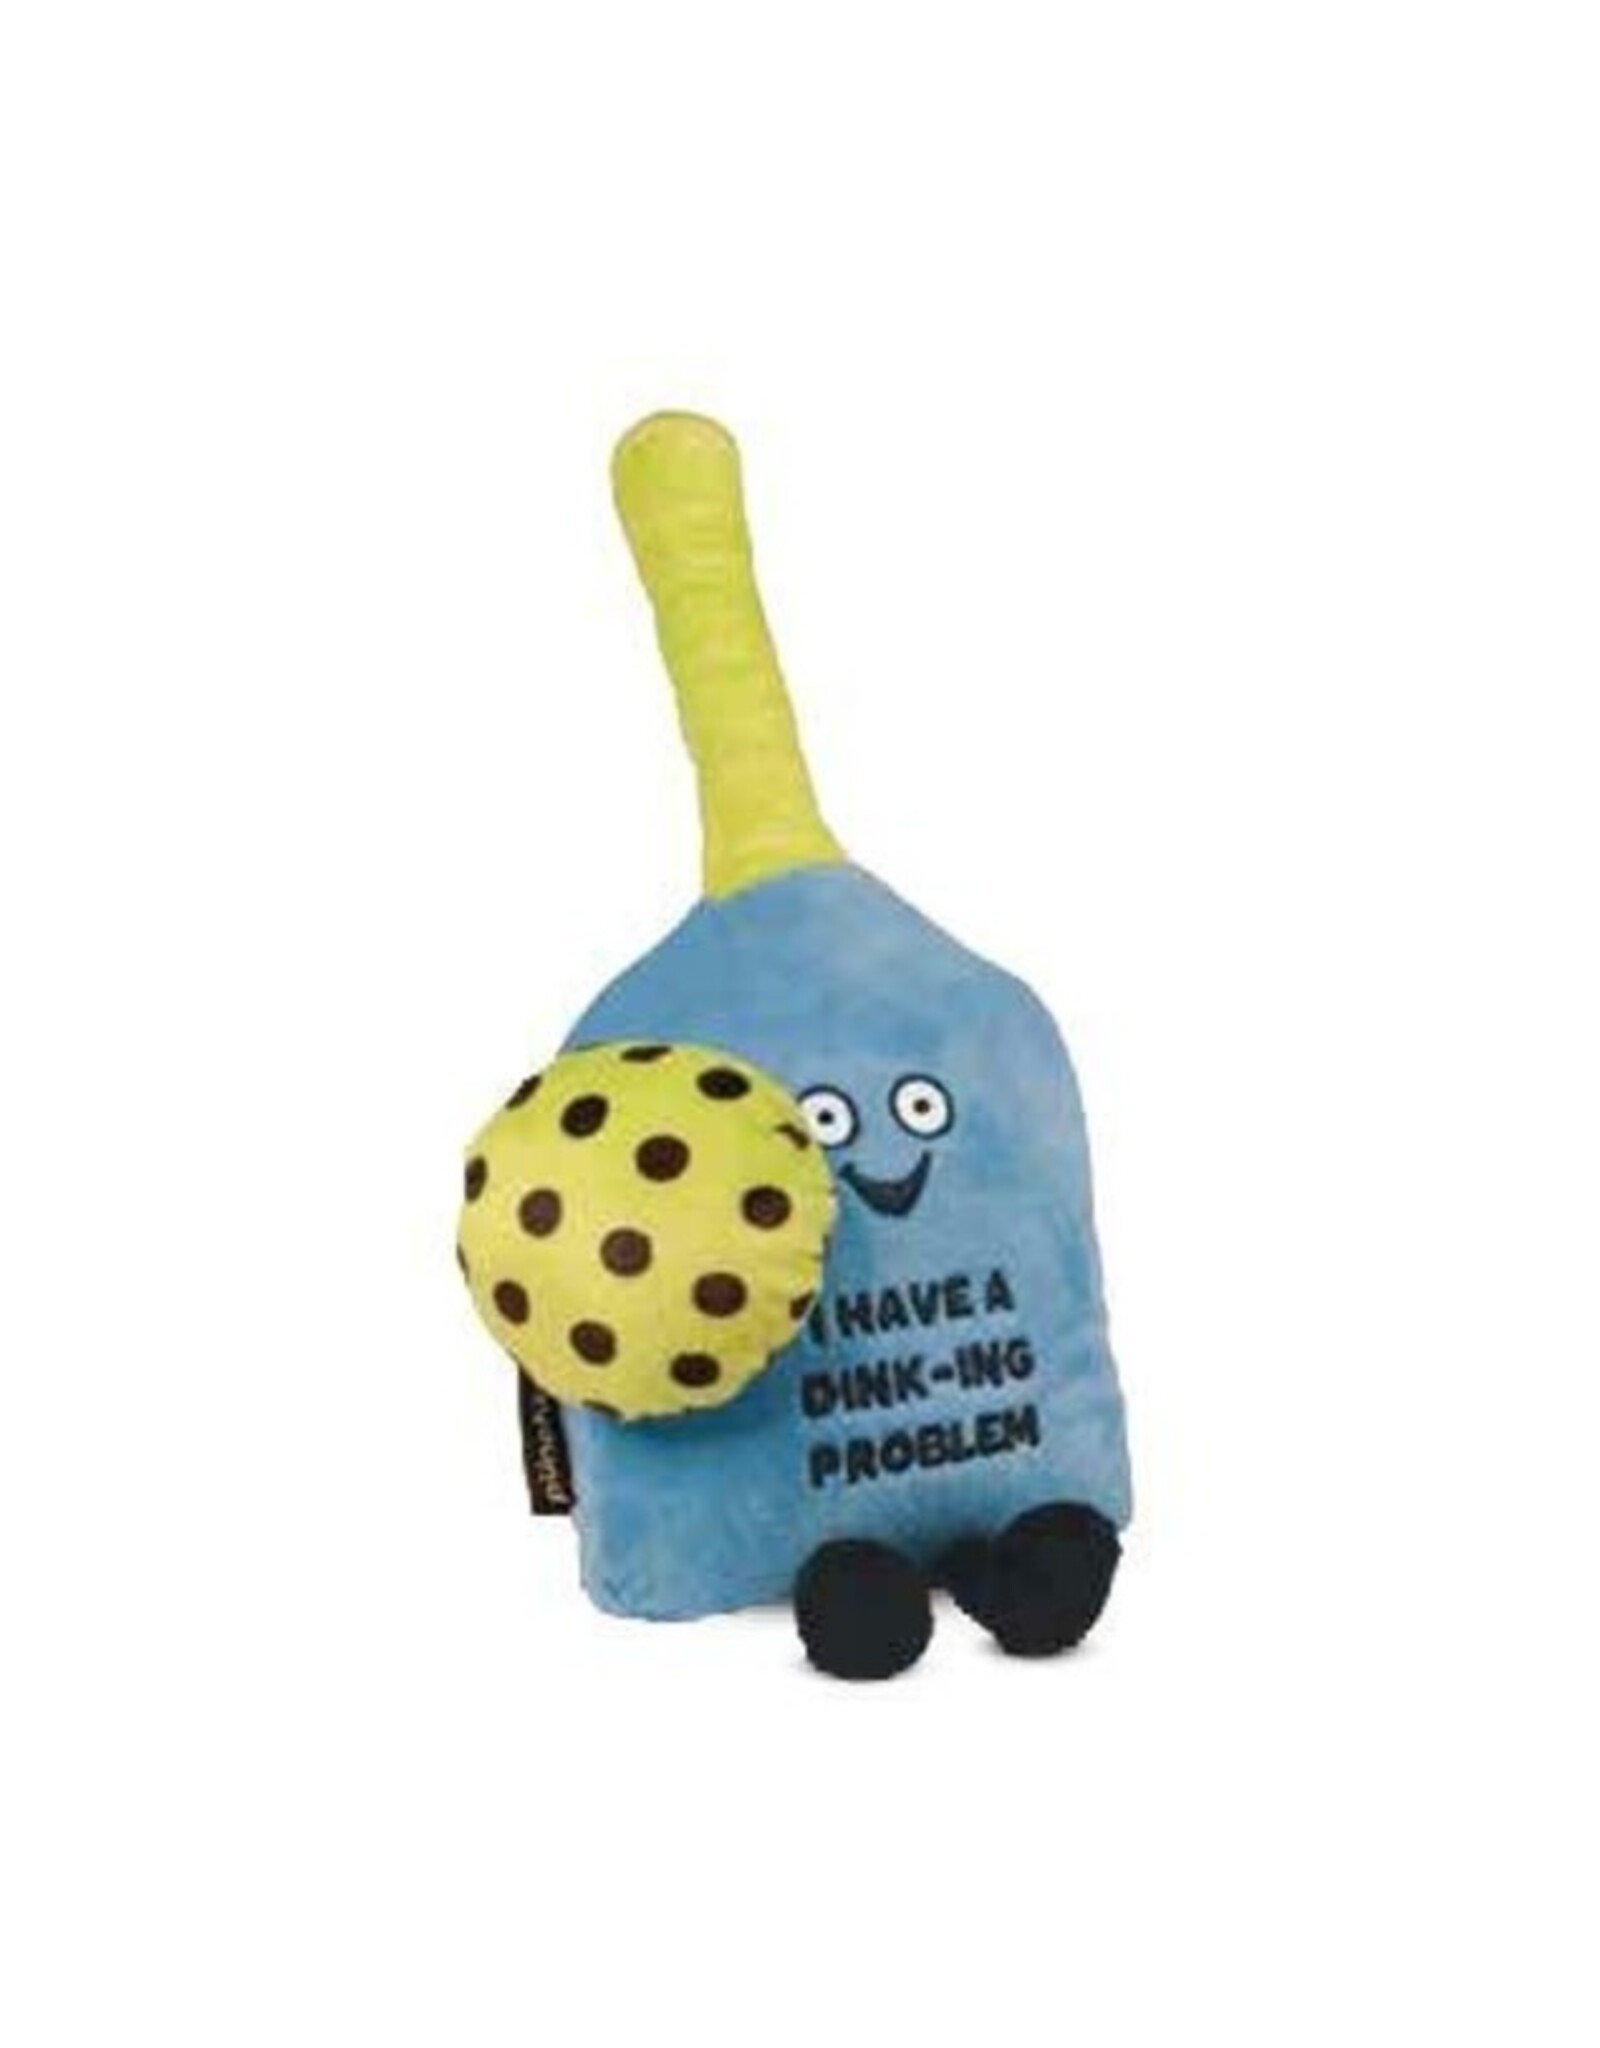 Punchkins Punchkins Pickleball - I Have a Dinking Problem